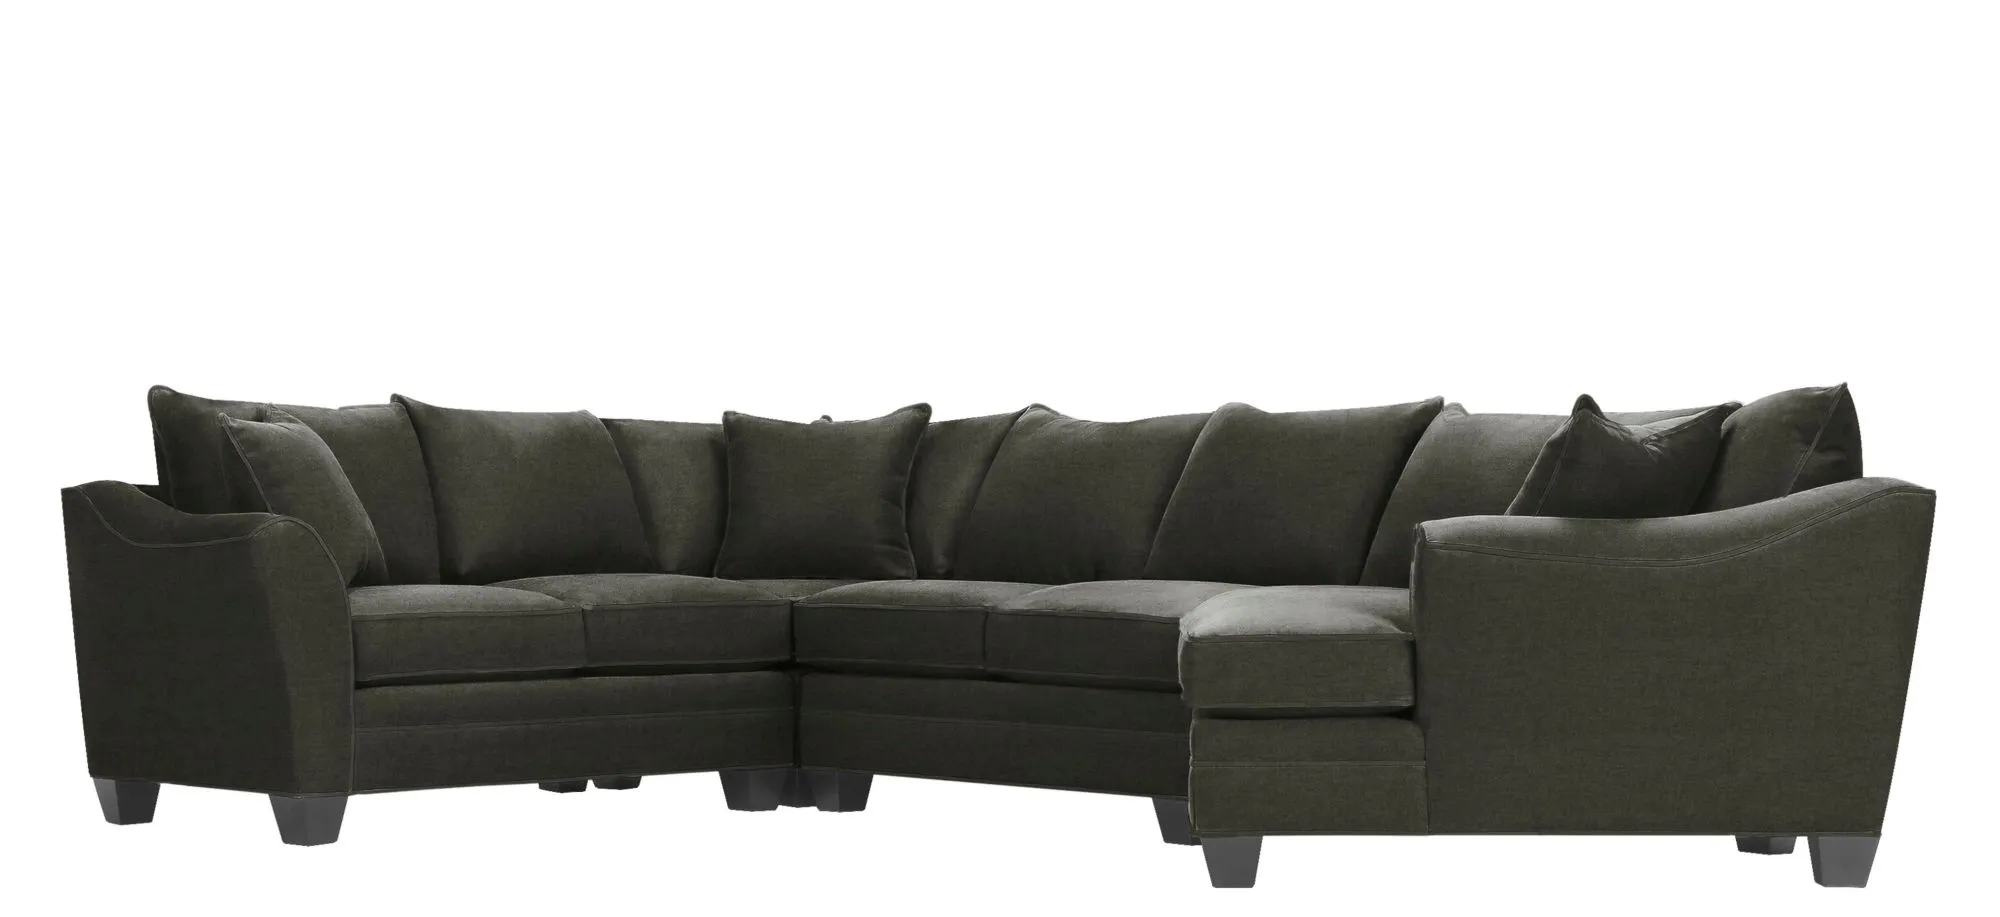 Foresthill 4-pc. Right Hand Cuddler with Loveseat Sectional Sofa in Santa Rosa Slate by H.M. Richards